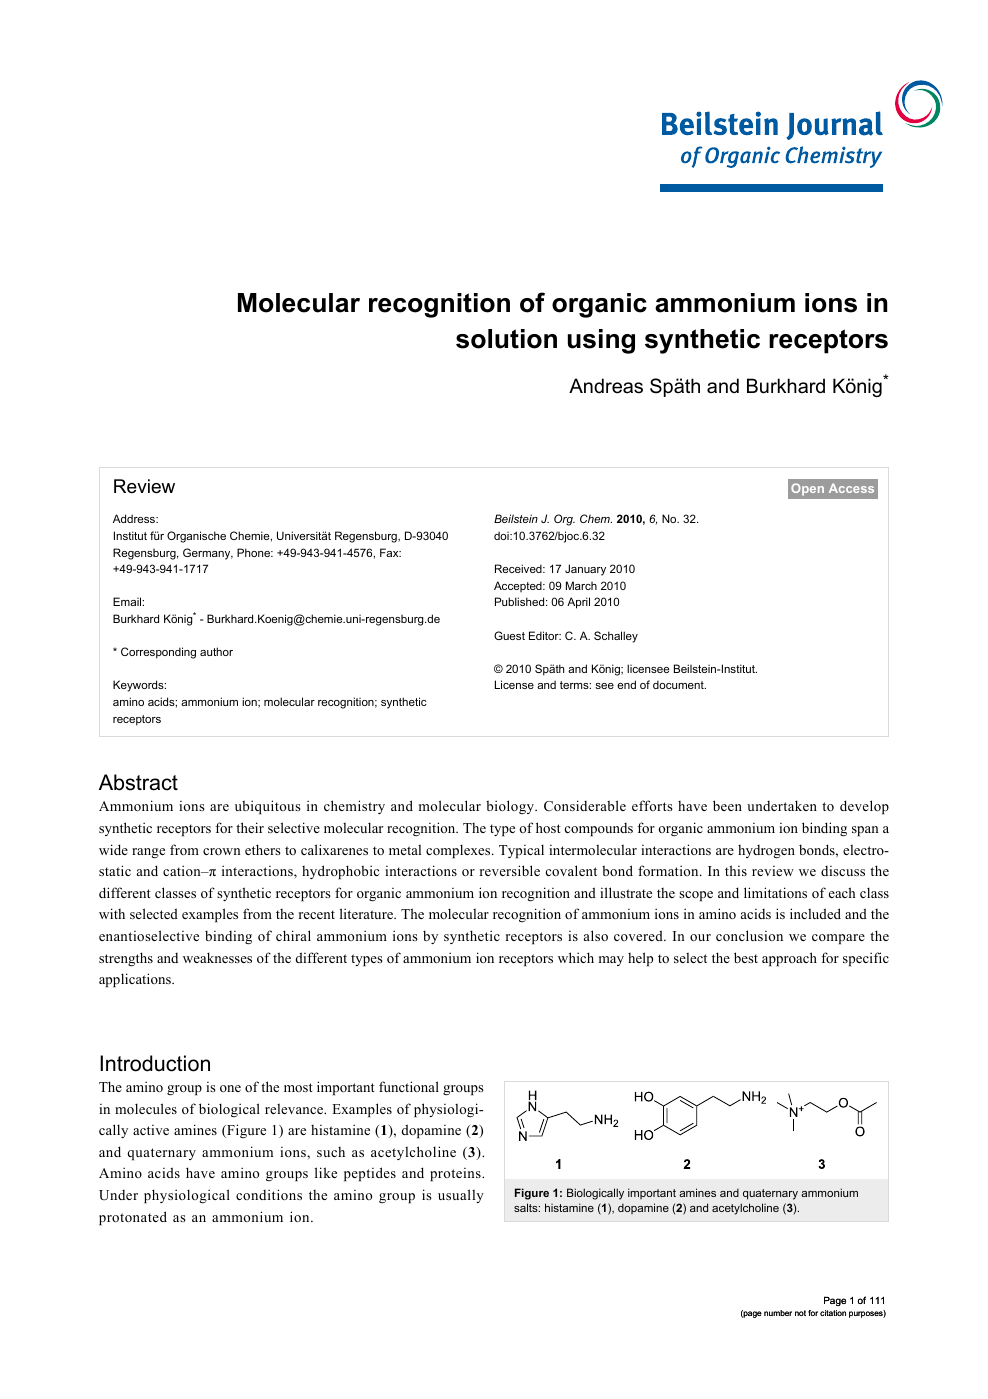 Molecular Recognition Of Organic Ammonium Ions In Solution Using Synthetic Receptors Topic Of Research Paper In Chemical Sciences Download Scholarly Article Pdf And Read For Free On Cyberleninka Open Science Hub